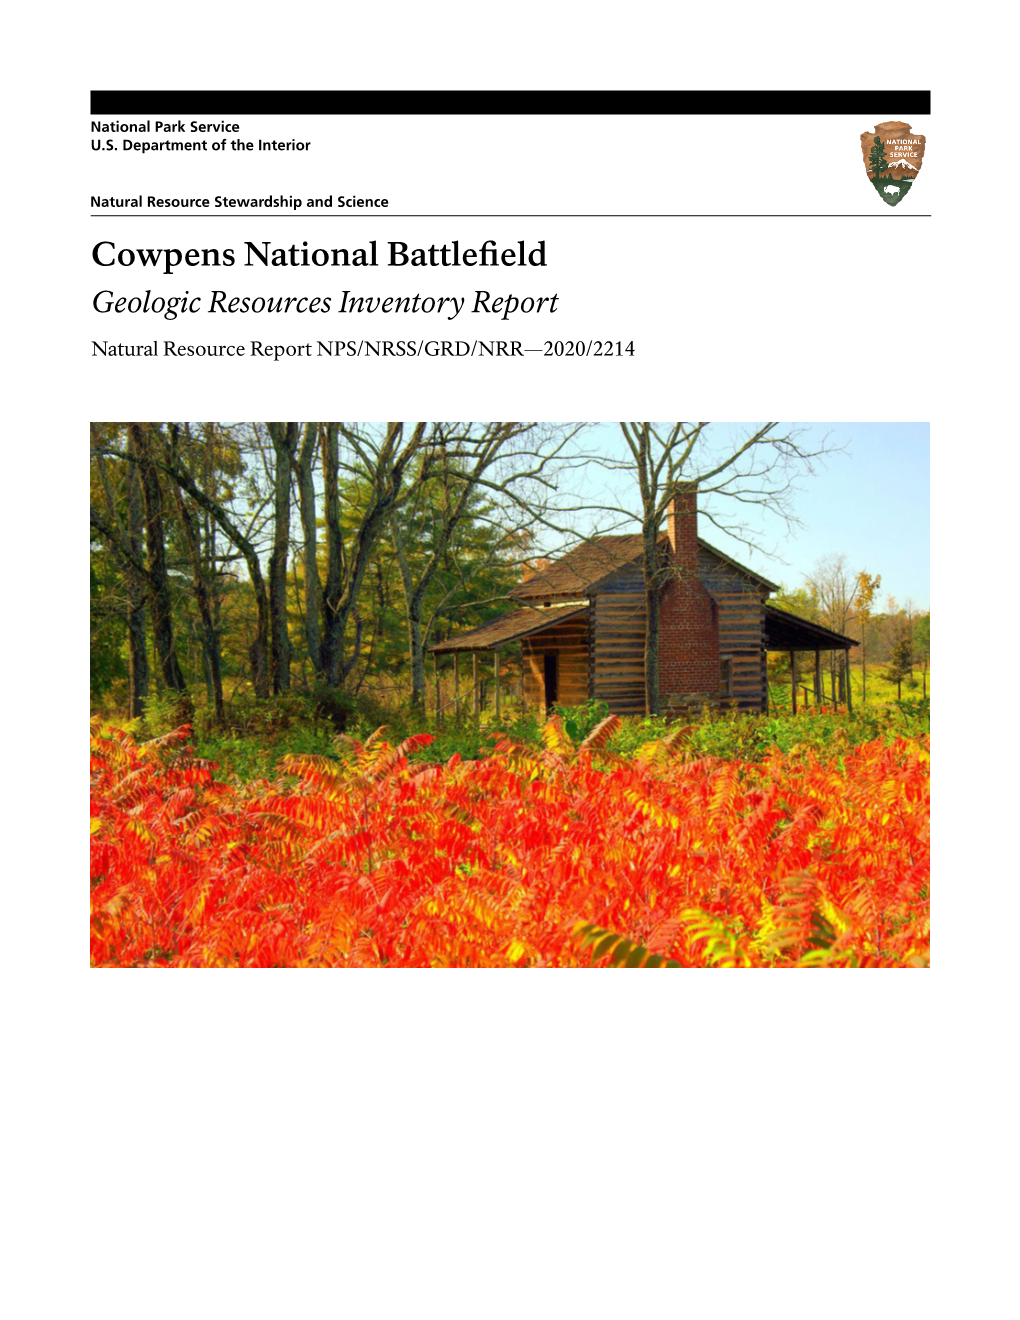 Cowpens National Battlefield: Geologic Resources Inventory Report